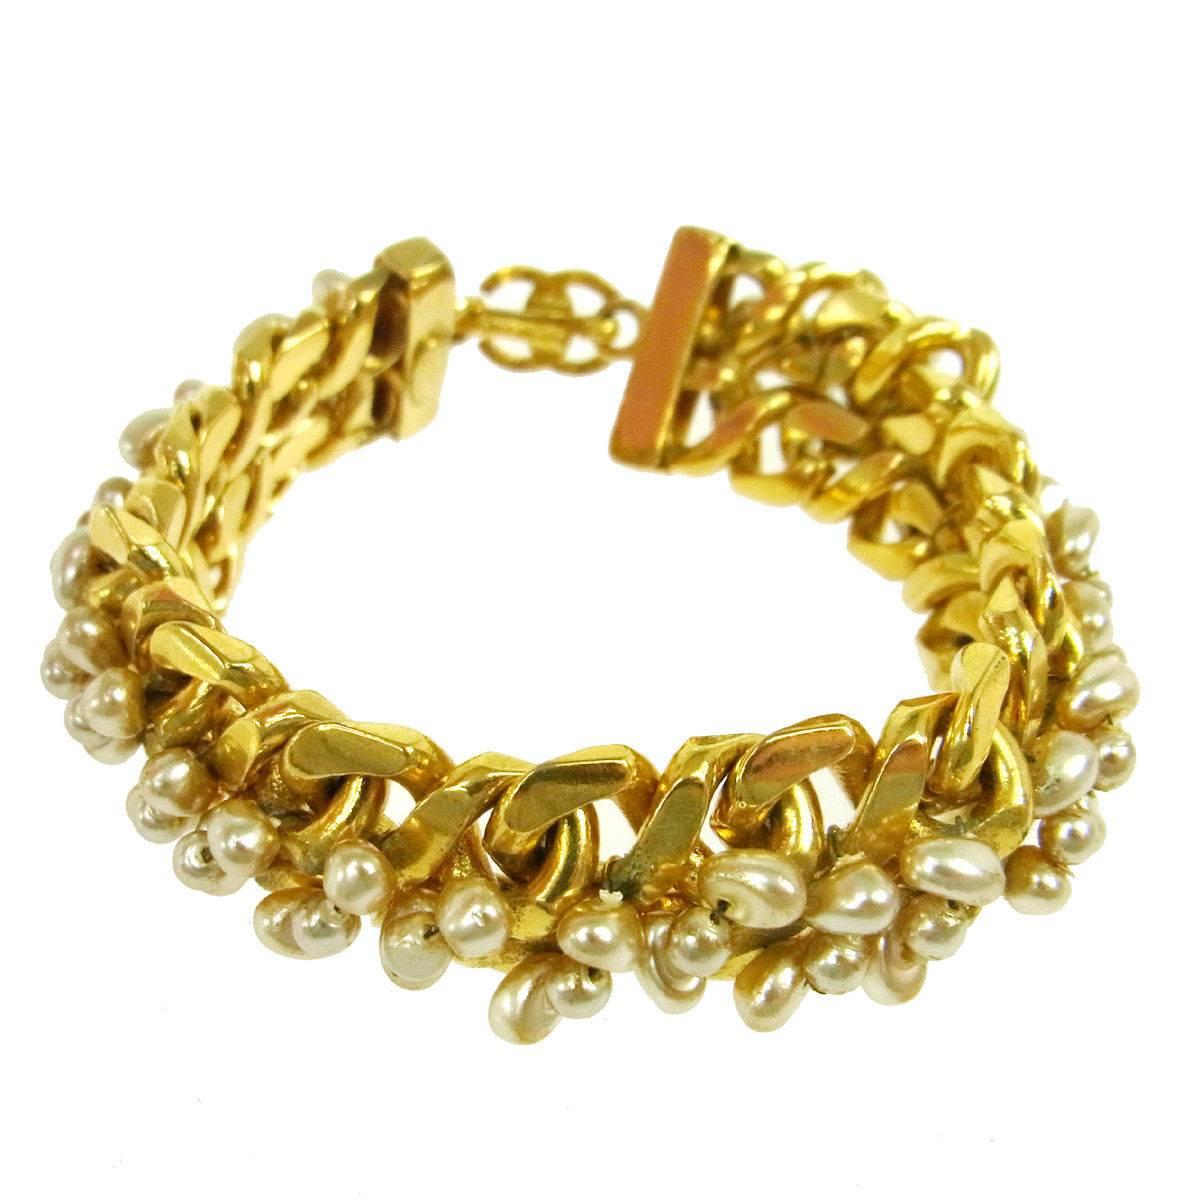 Chanel Gold Chain Link Beaded Pearl Statement Evening Cuff Bracelet